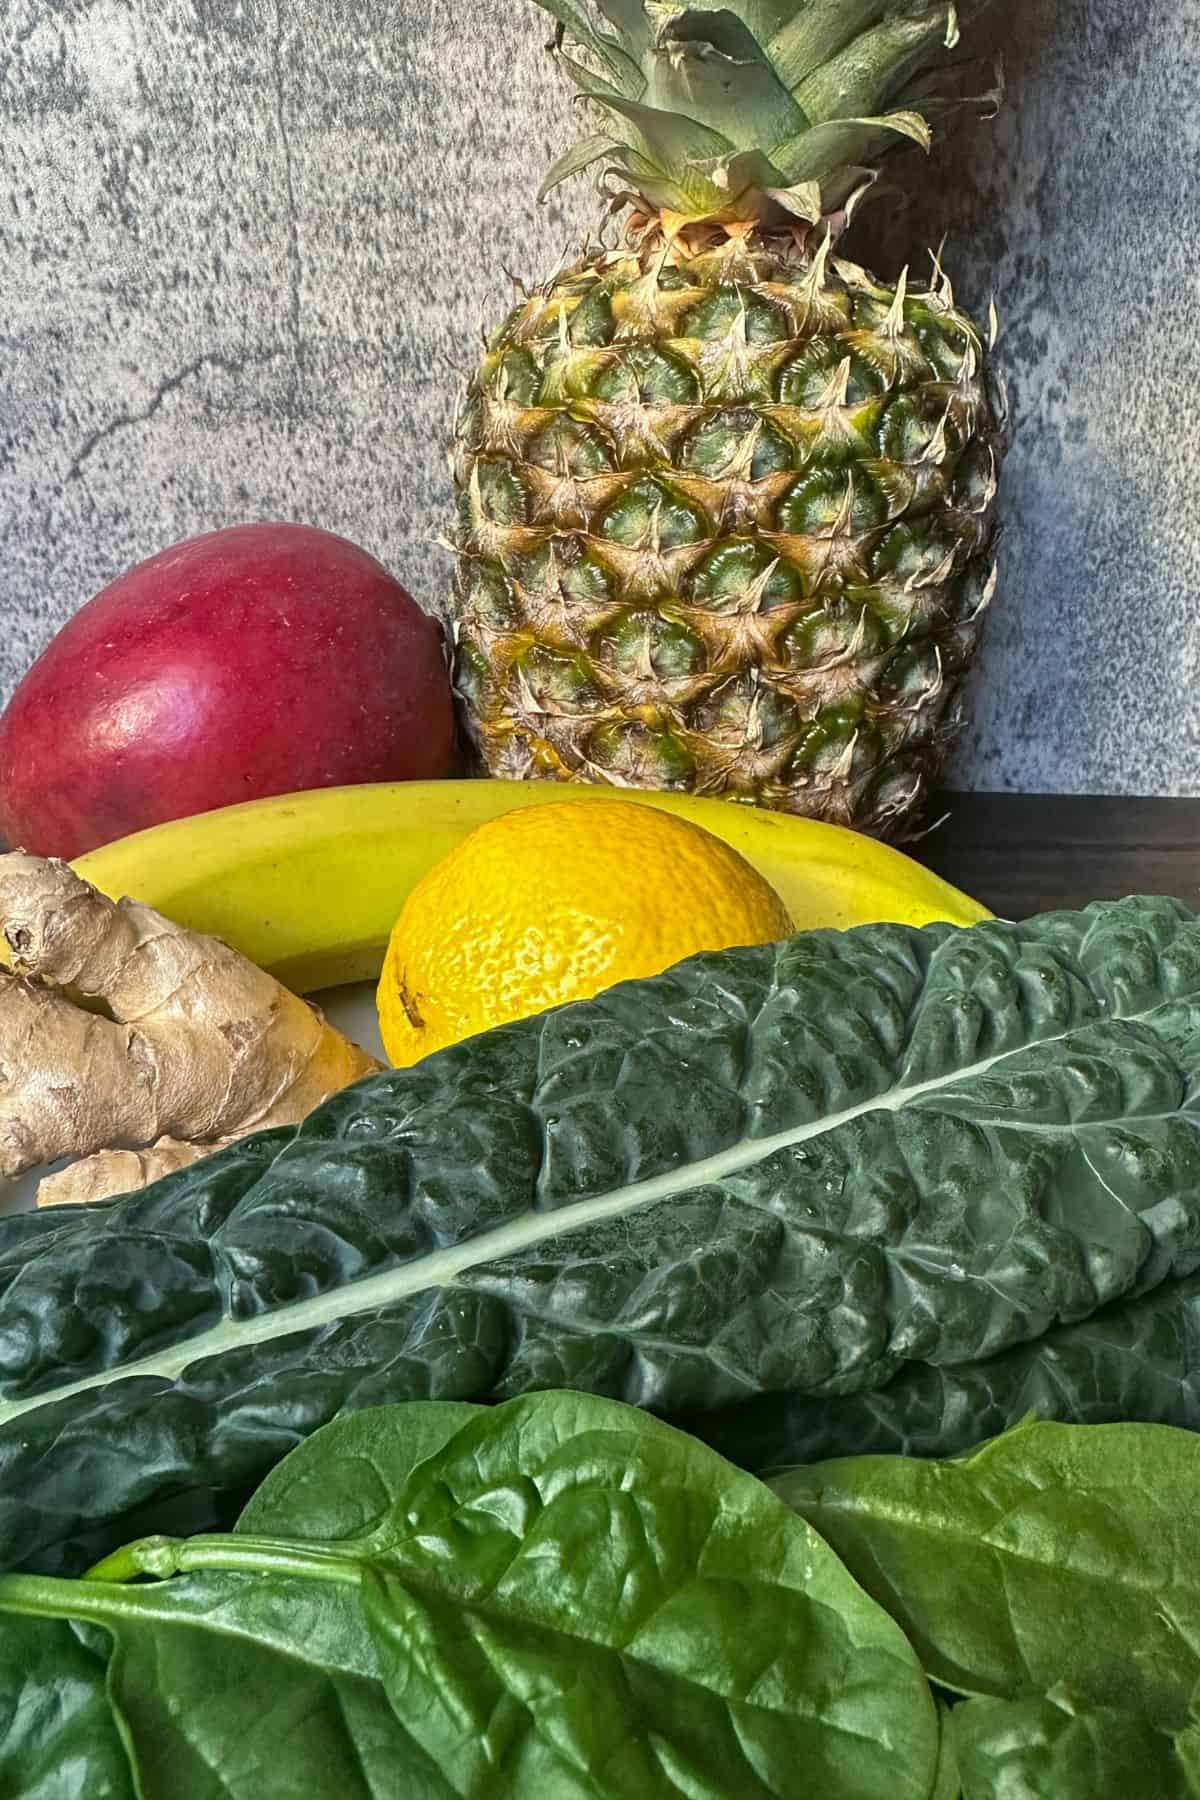 Fresh spinach, lacinto kale, ginger root, a lemon, a red mango, and a whole pineapple are shown to indicate the ingredients for the detox island green smoothie.